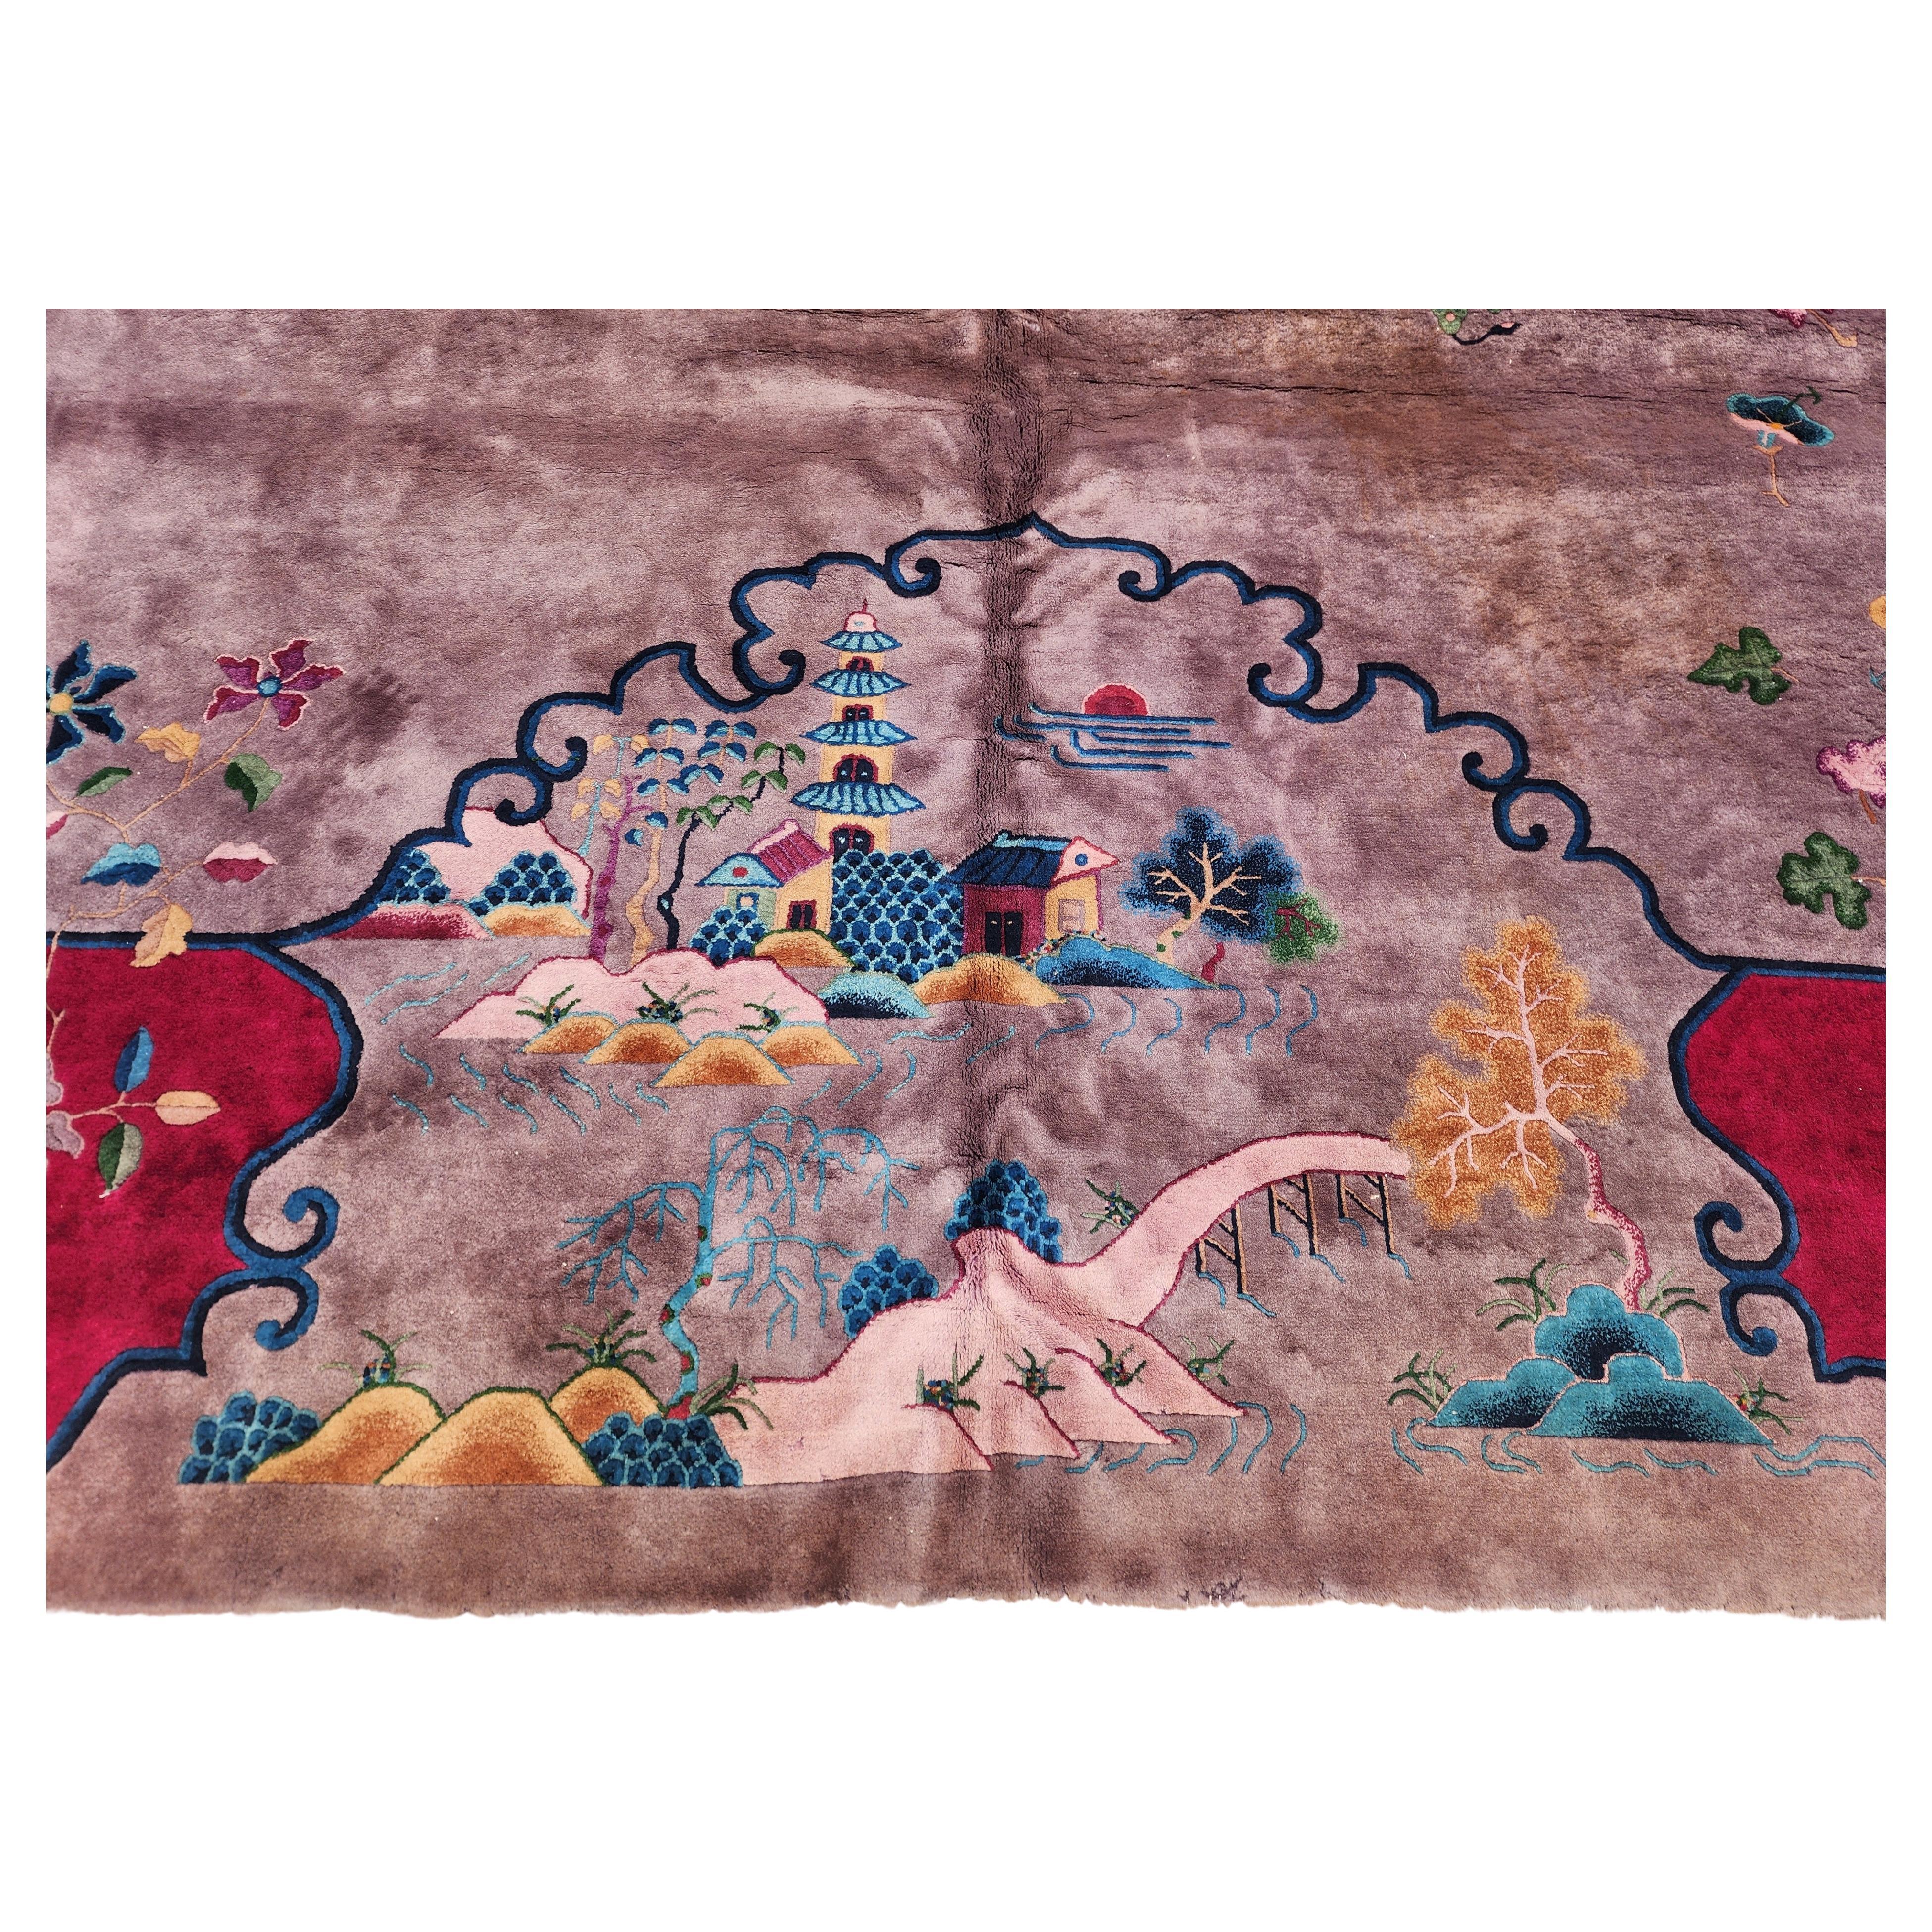 One of a kind !
Art deco Chinese Nichols rug  Made in the early 1920s from high quality Chinese wool found along the ancient 